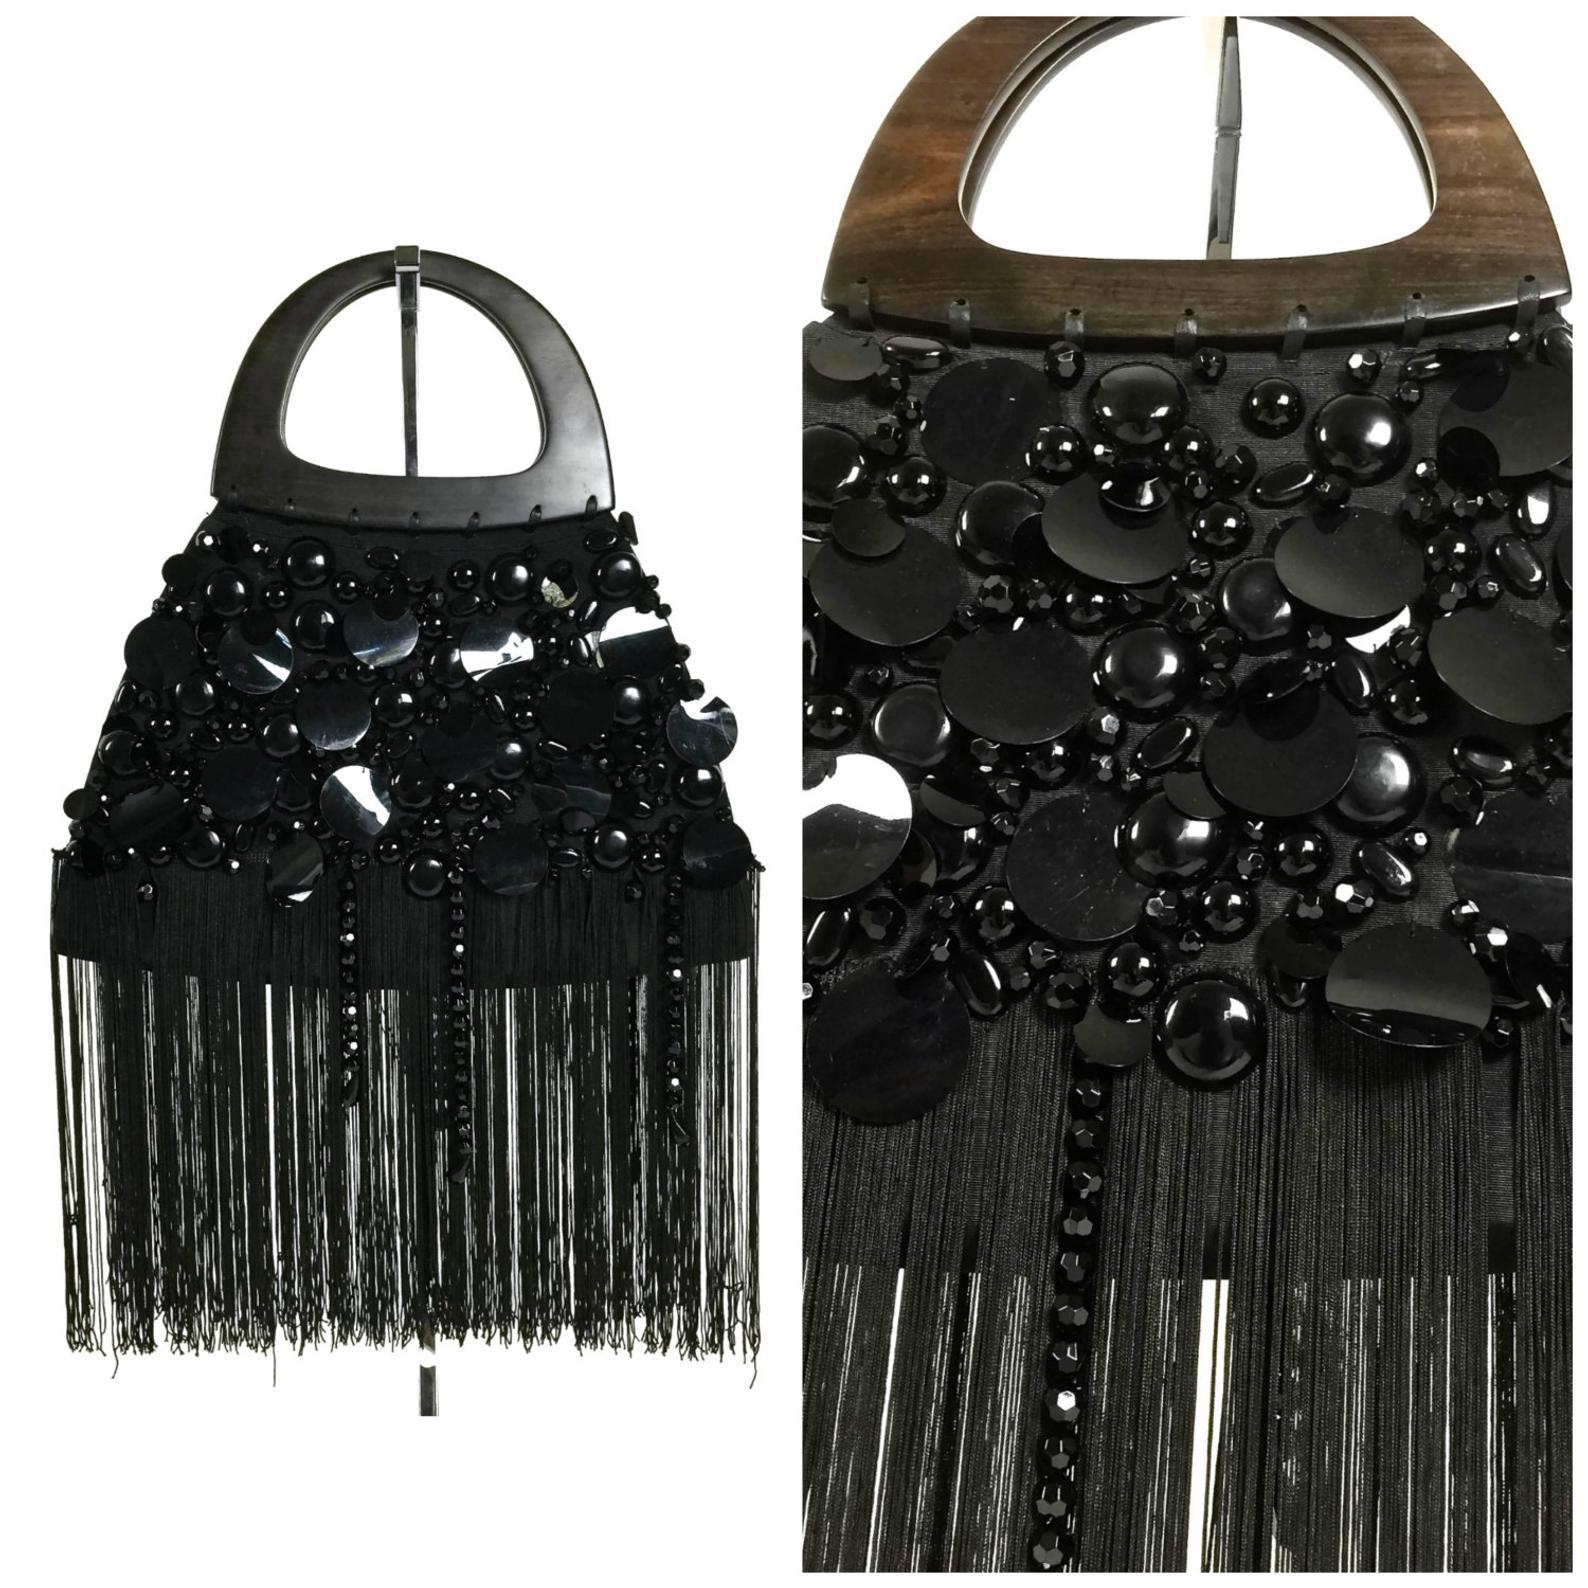 Vintage YSL Yves Saint Laurent Disc Beaded Fringe Wood Top Handle Hand Bag

Measurements:
Total Height: 24 inches (60.96 cm) handle and fringes included
Width: 14 6/8 inches (37.46 cm)
Depth: 2 2/8 inches (5.71 cm)

Features:
- 100% Authentic YVES